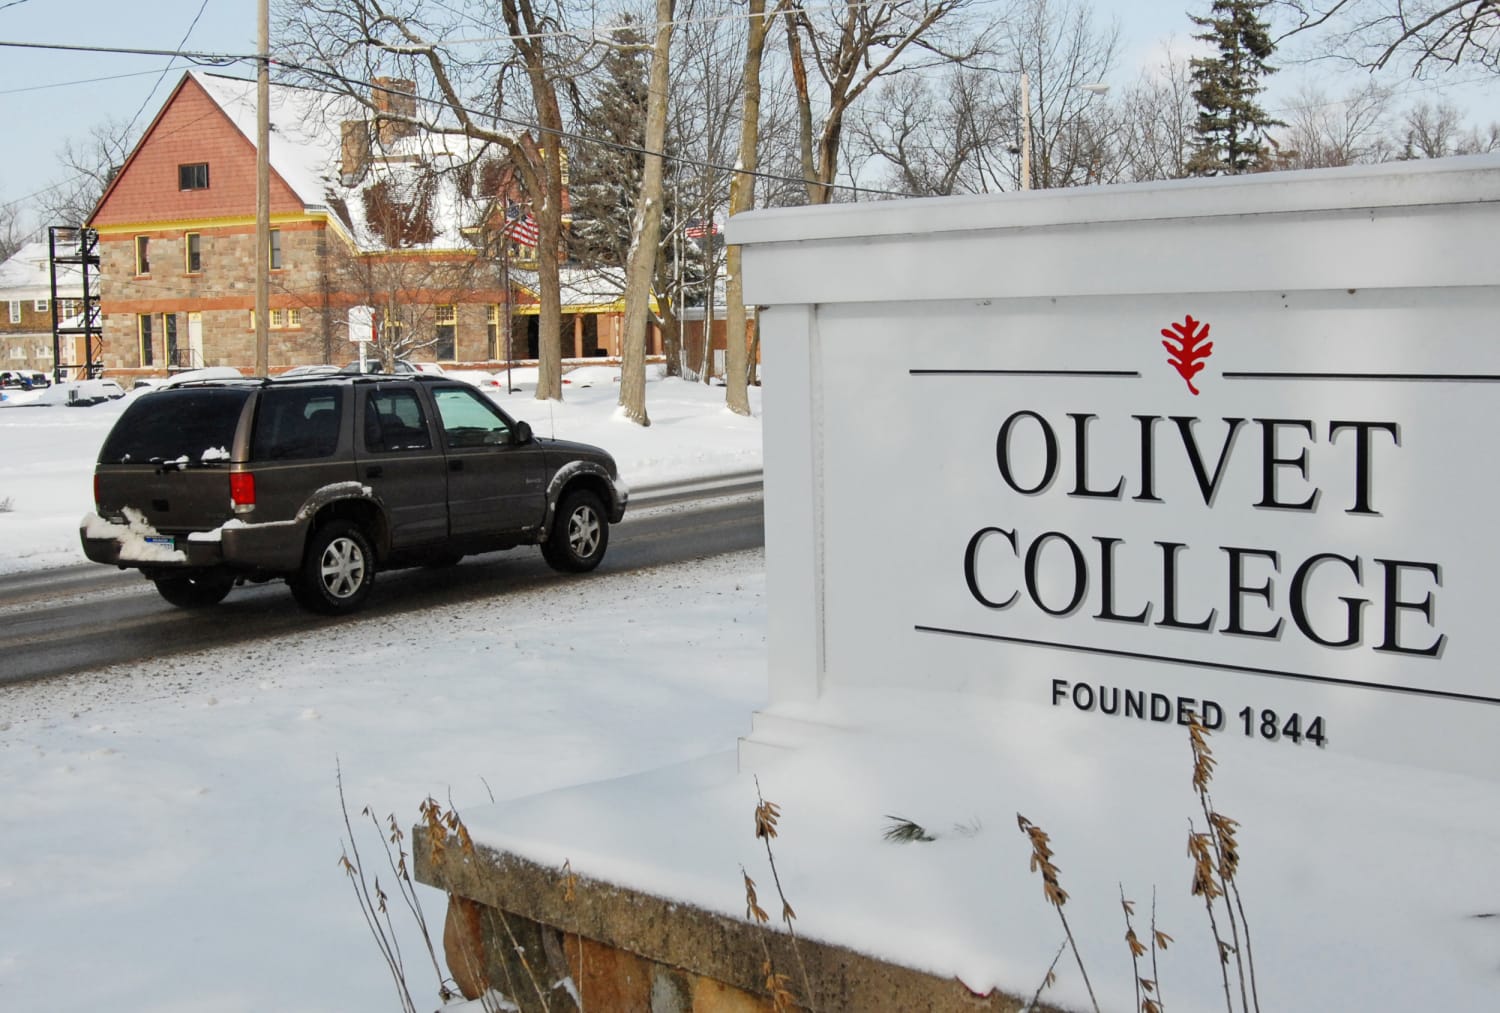 Olivet College graduate accused of shooting school baseball player after game